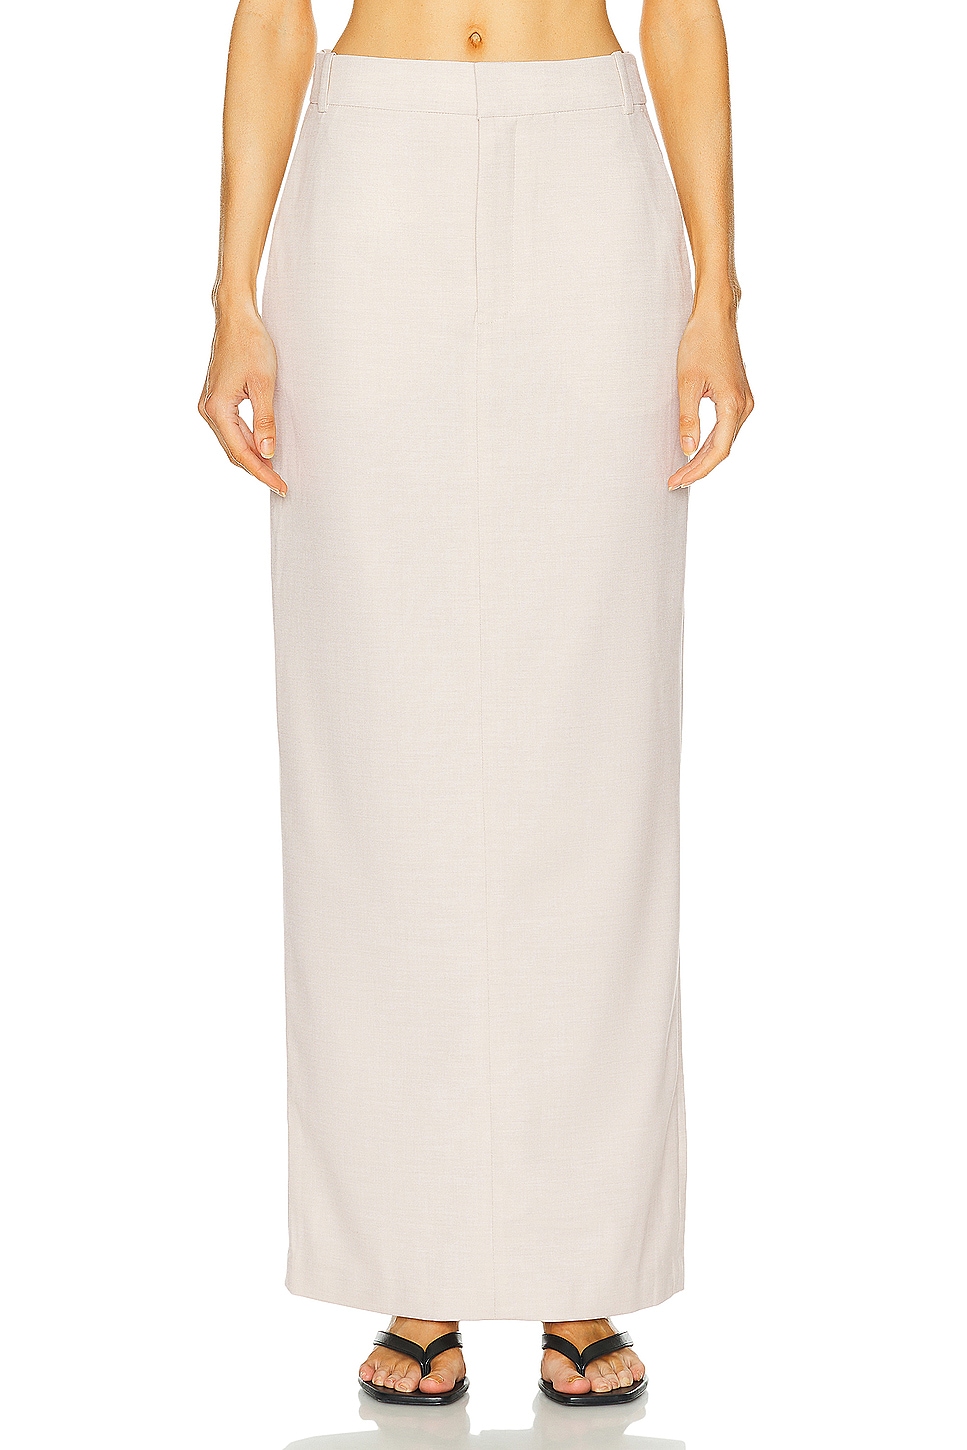 Image 1 of L'Academie by Marianna Hendry Maxi Skirt in Beige